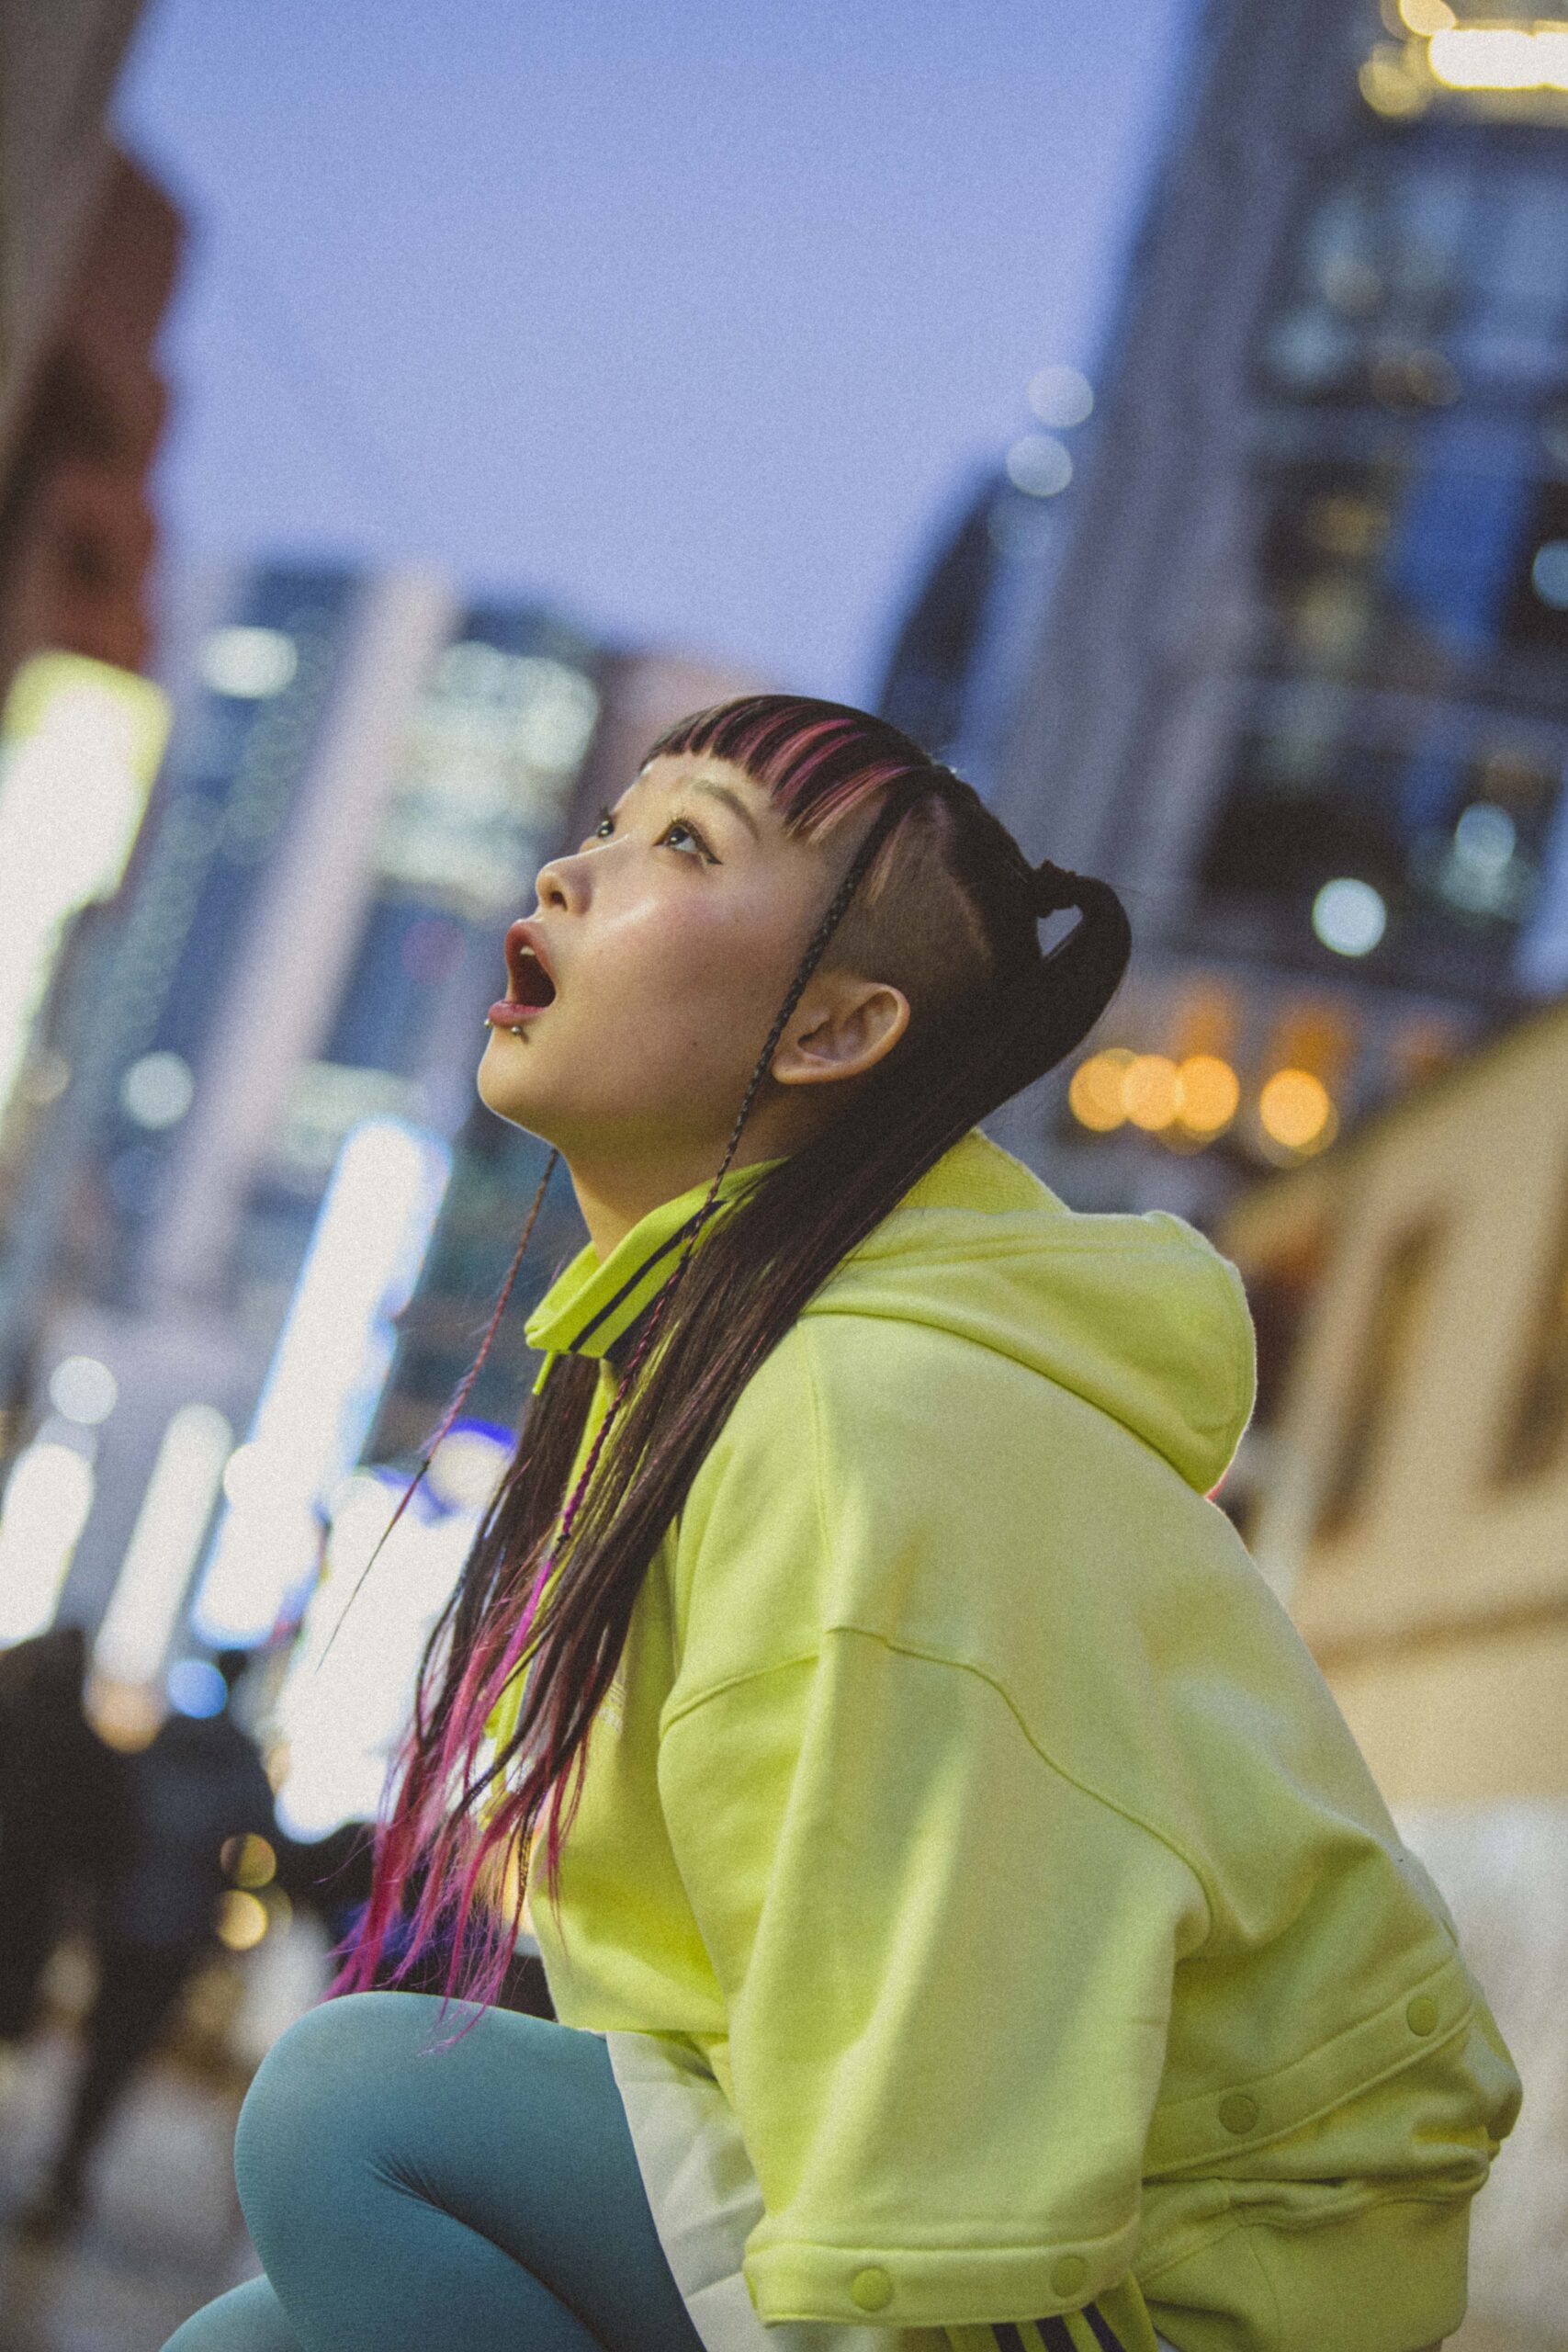 A New Chapter of Wednesday Campanella Draws a New Era of Japanese Pop Music